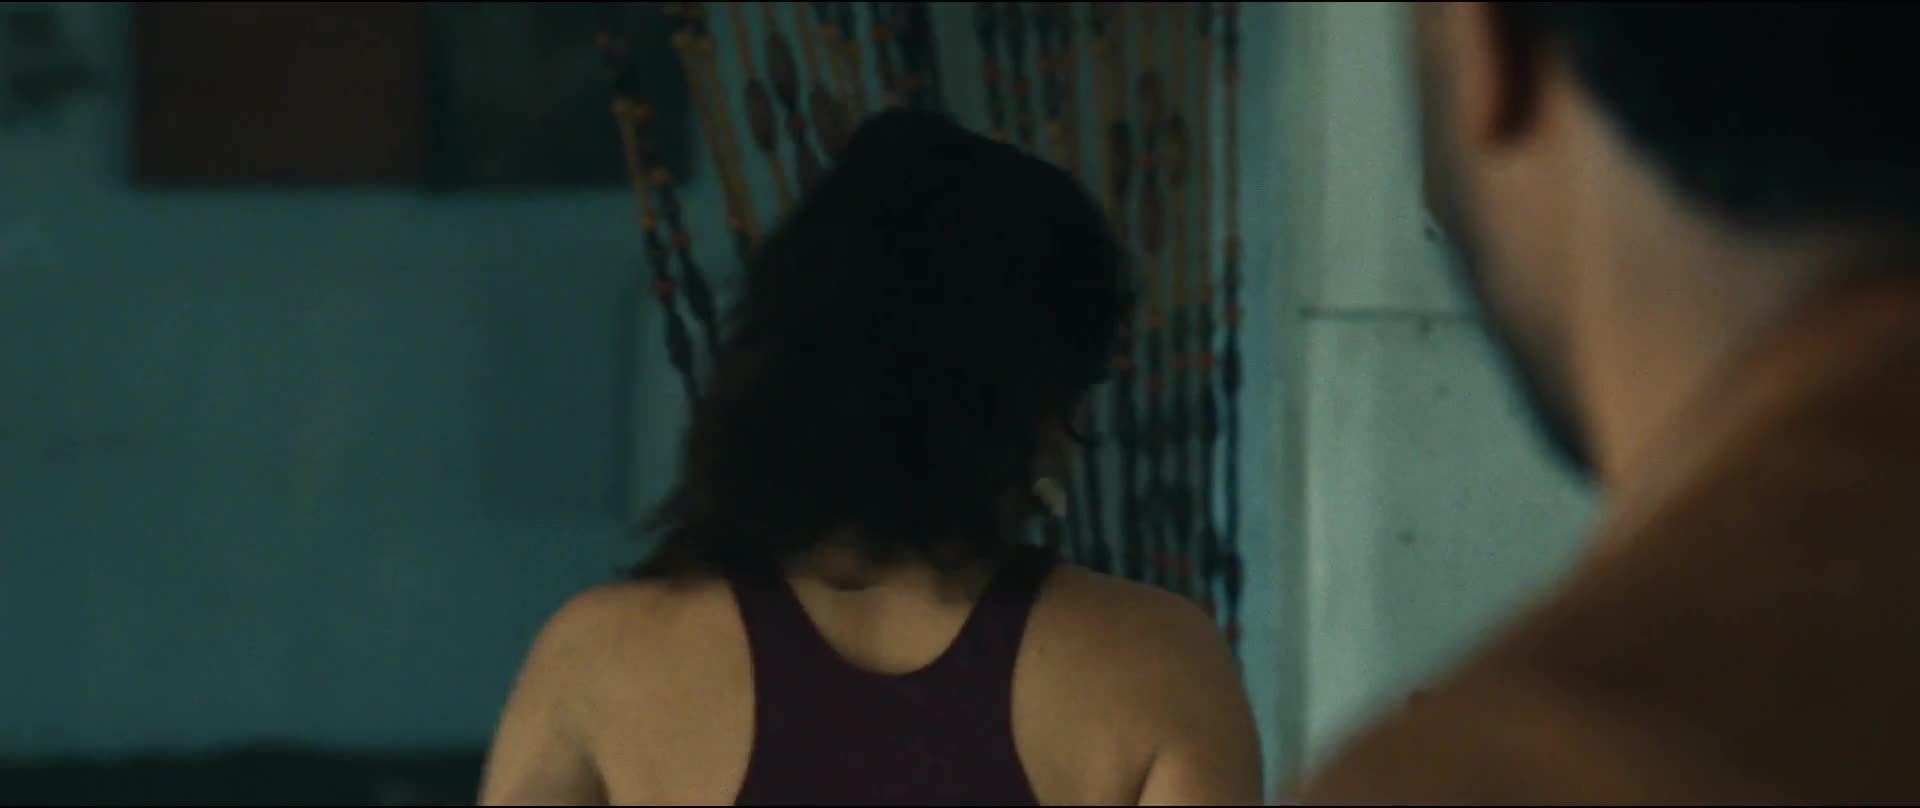 Natalie Martinez scene from message from the king